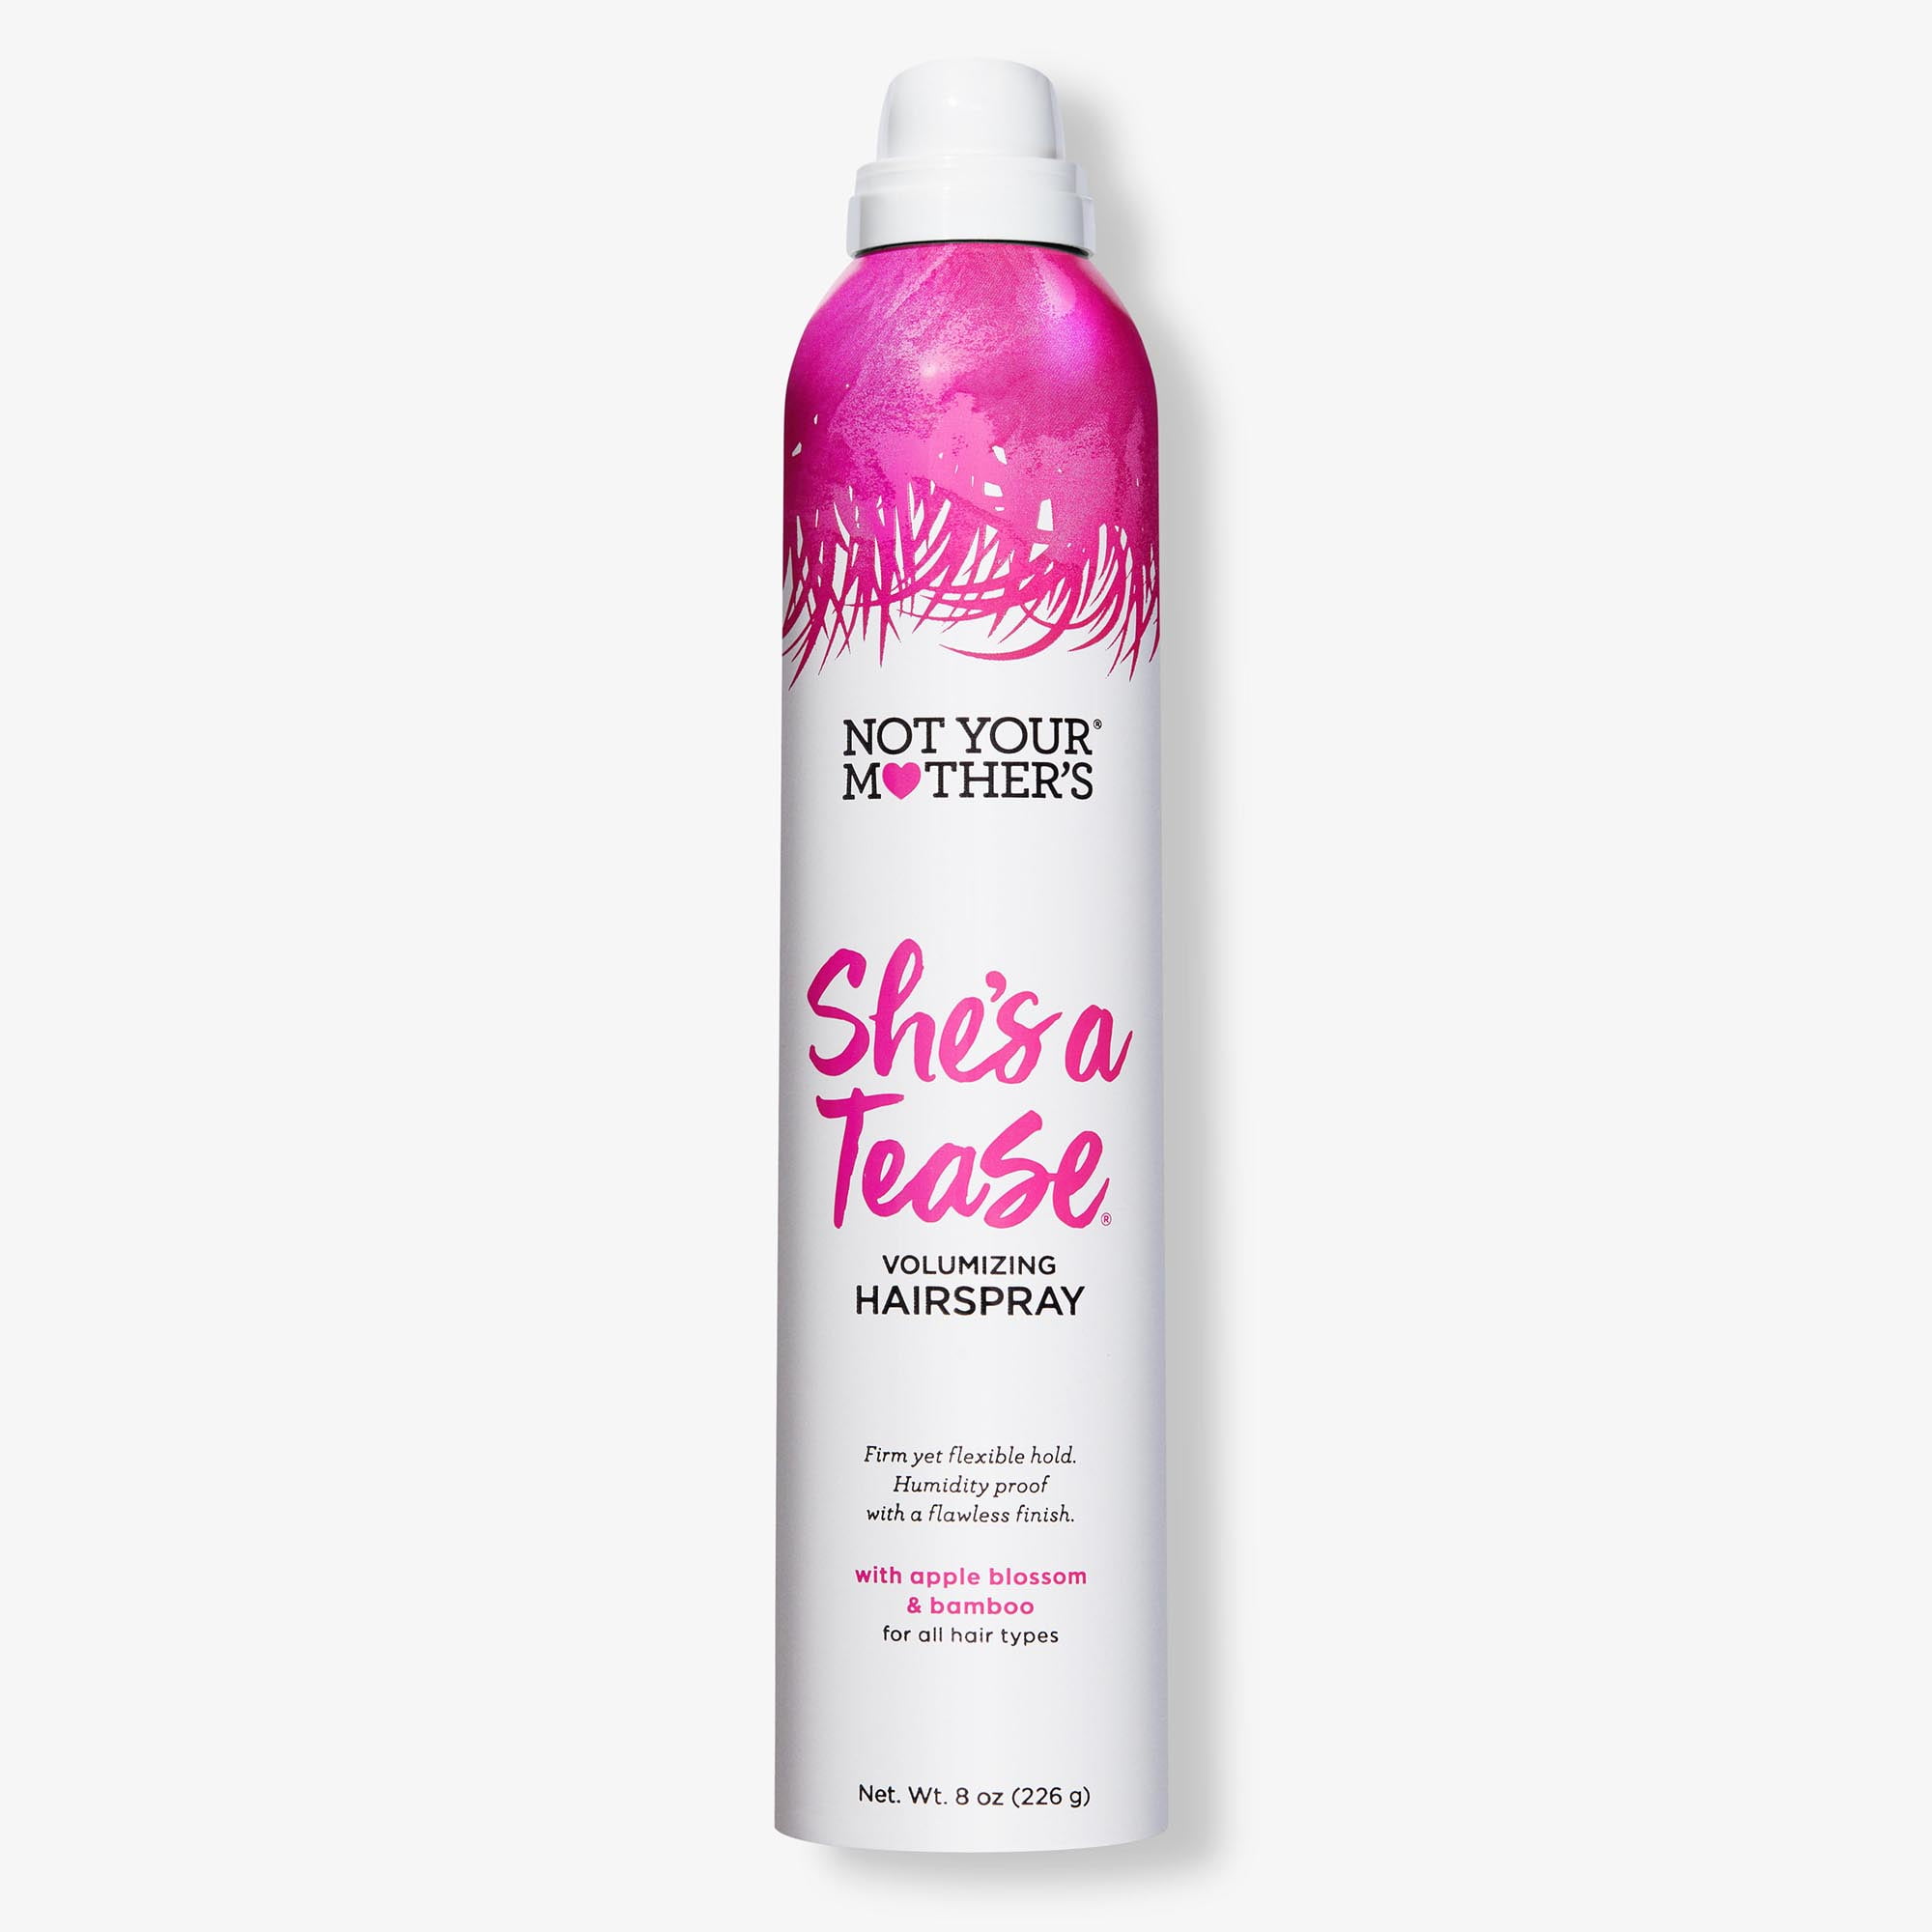 Not Your Mother's She's a Tease Volumizing Hairspray, 8 oz 